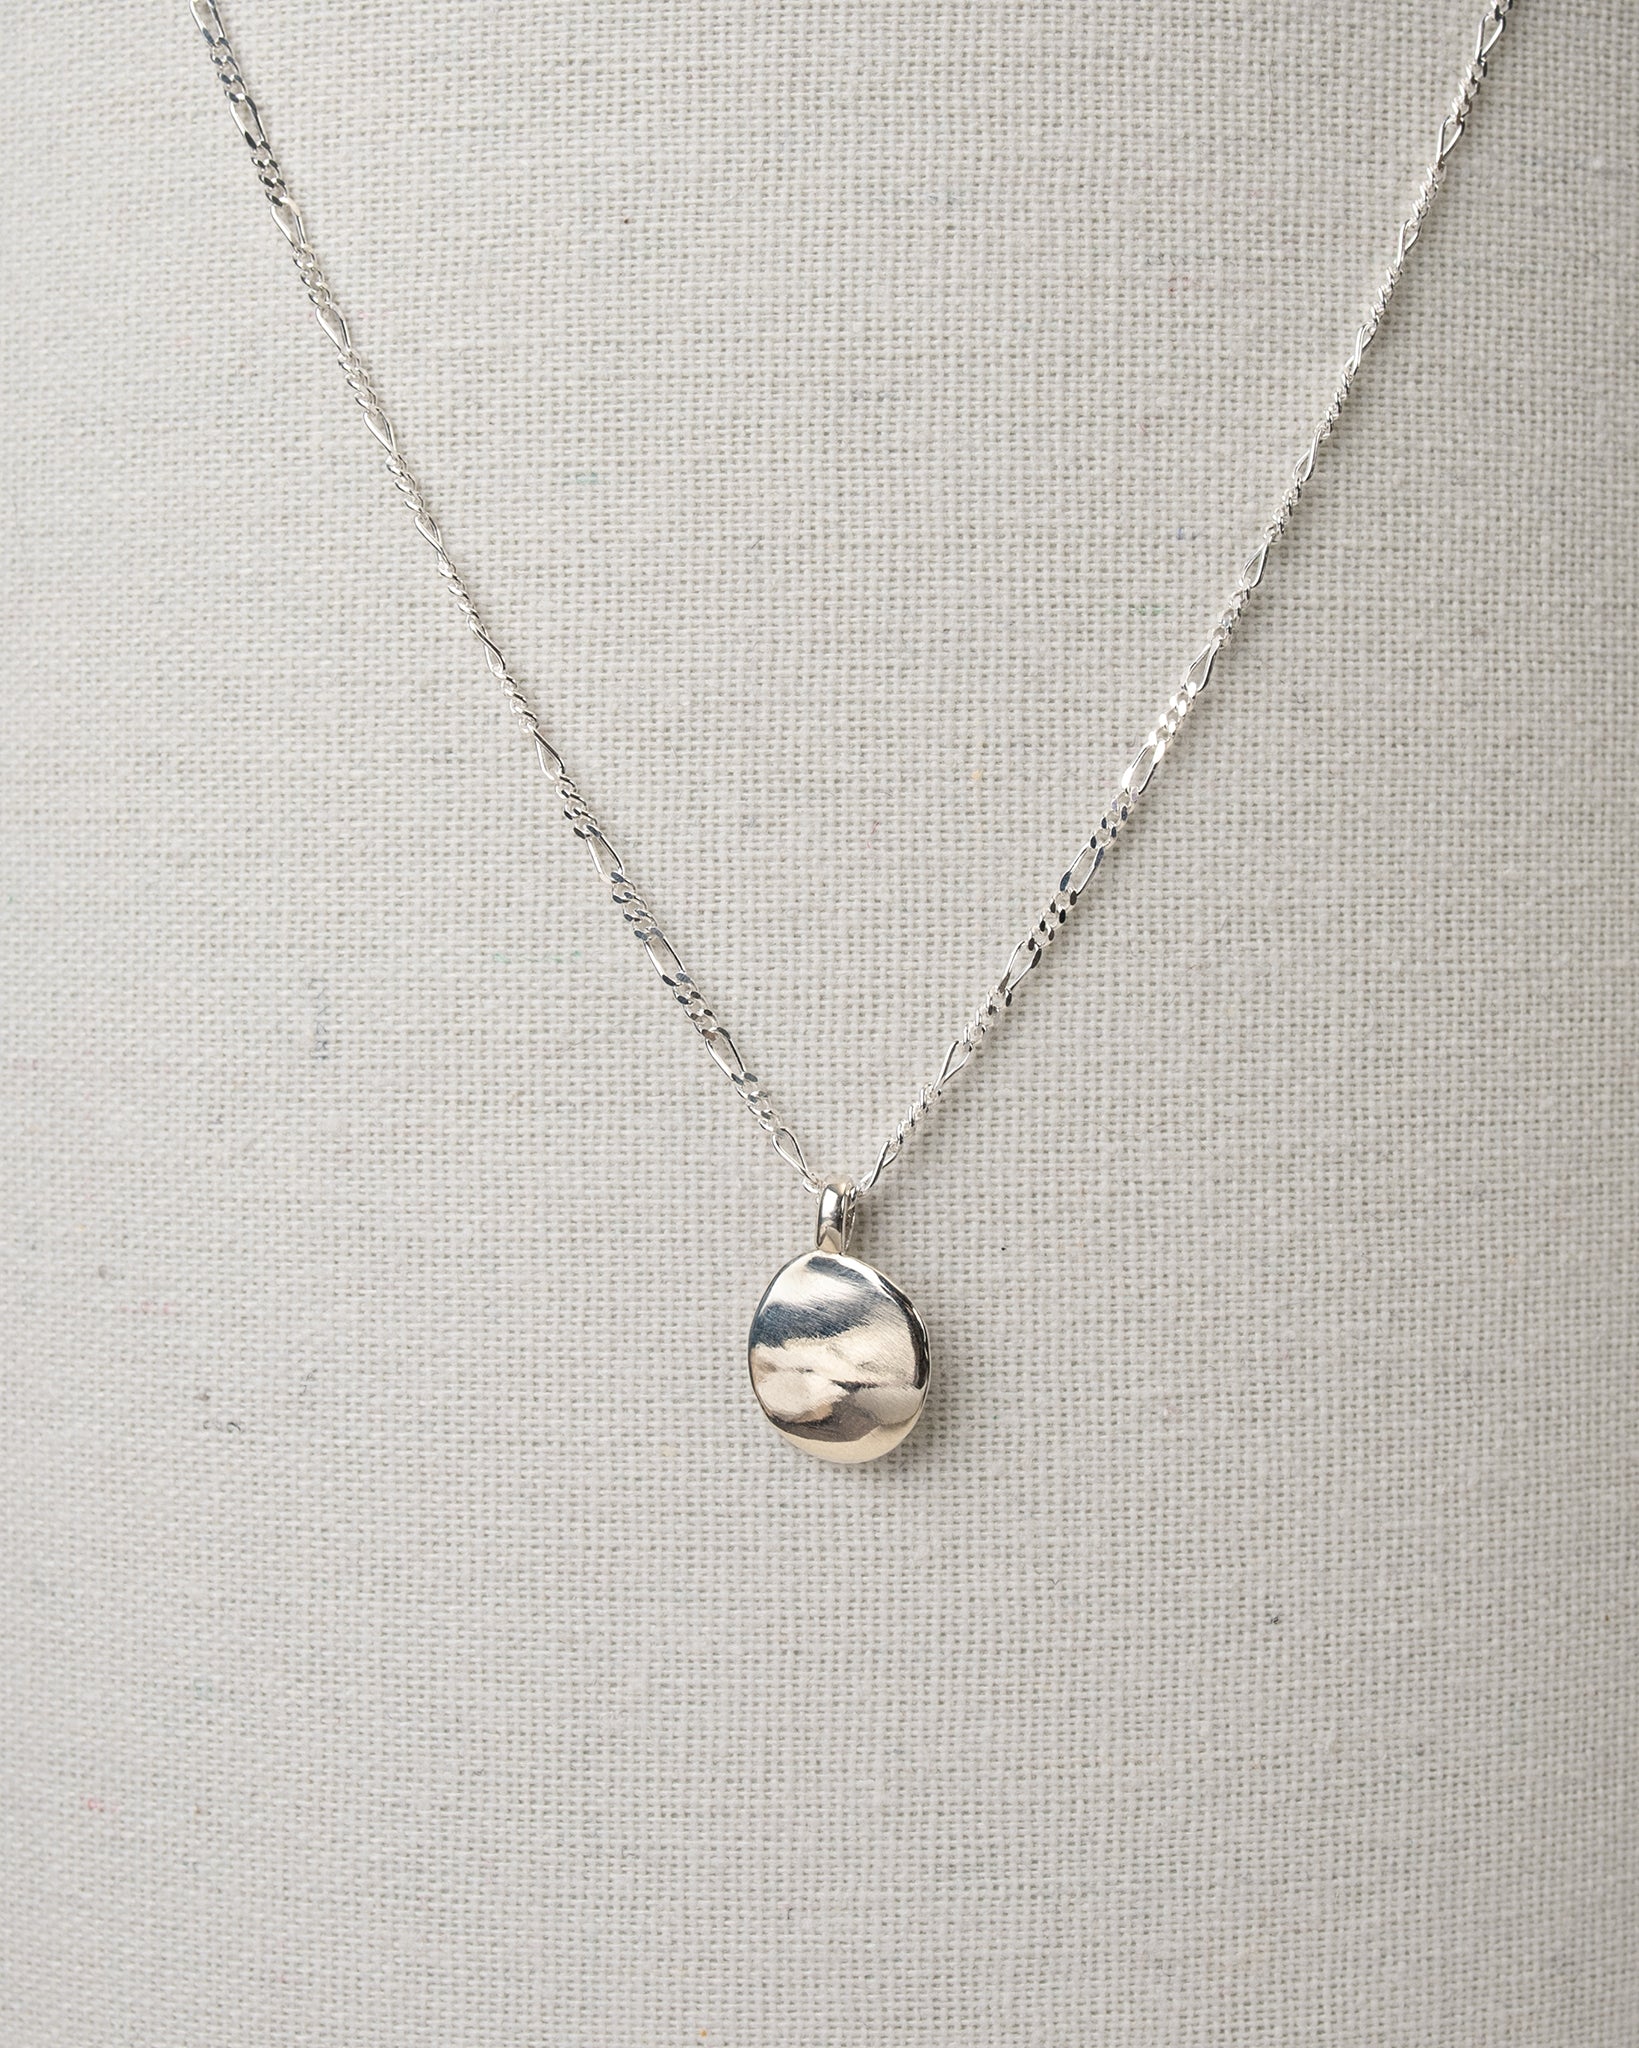 Silver oval pendant necklace hanging on canvas